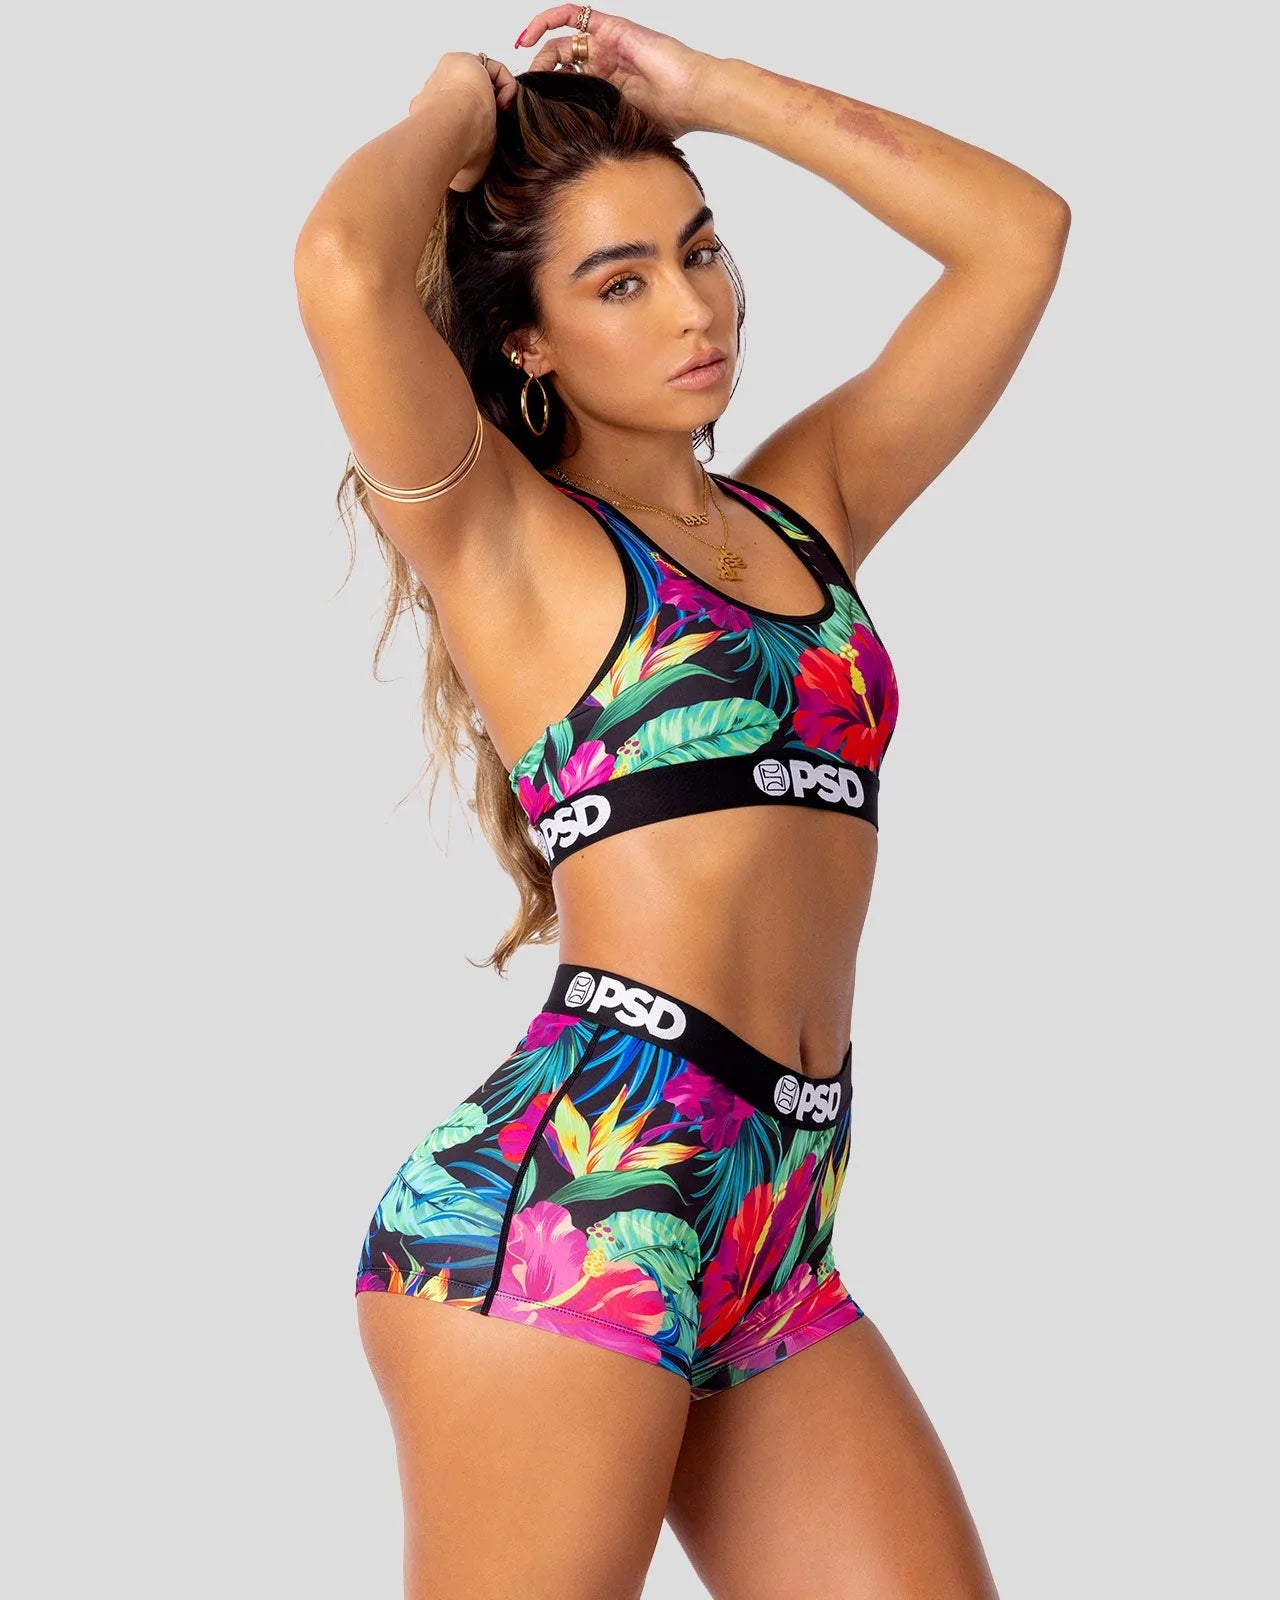 SOMMER RAY – TROPICAL Sports Bra